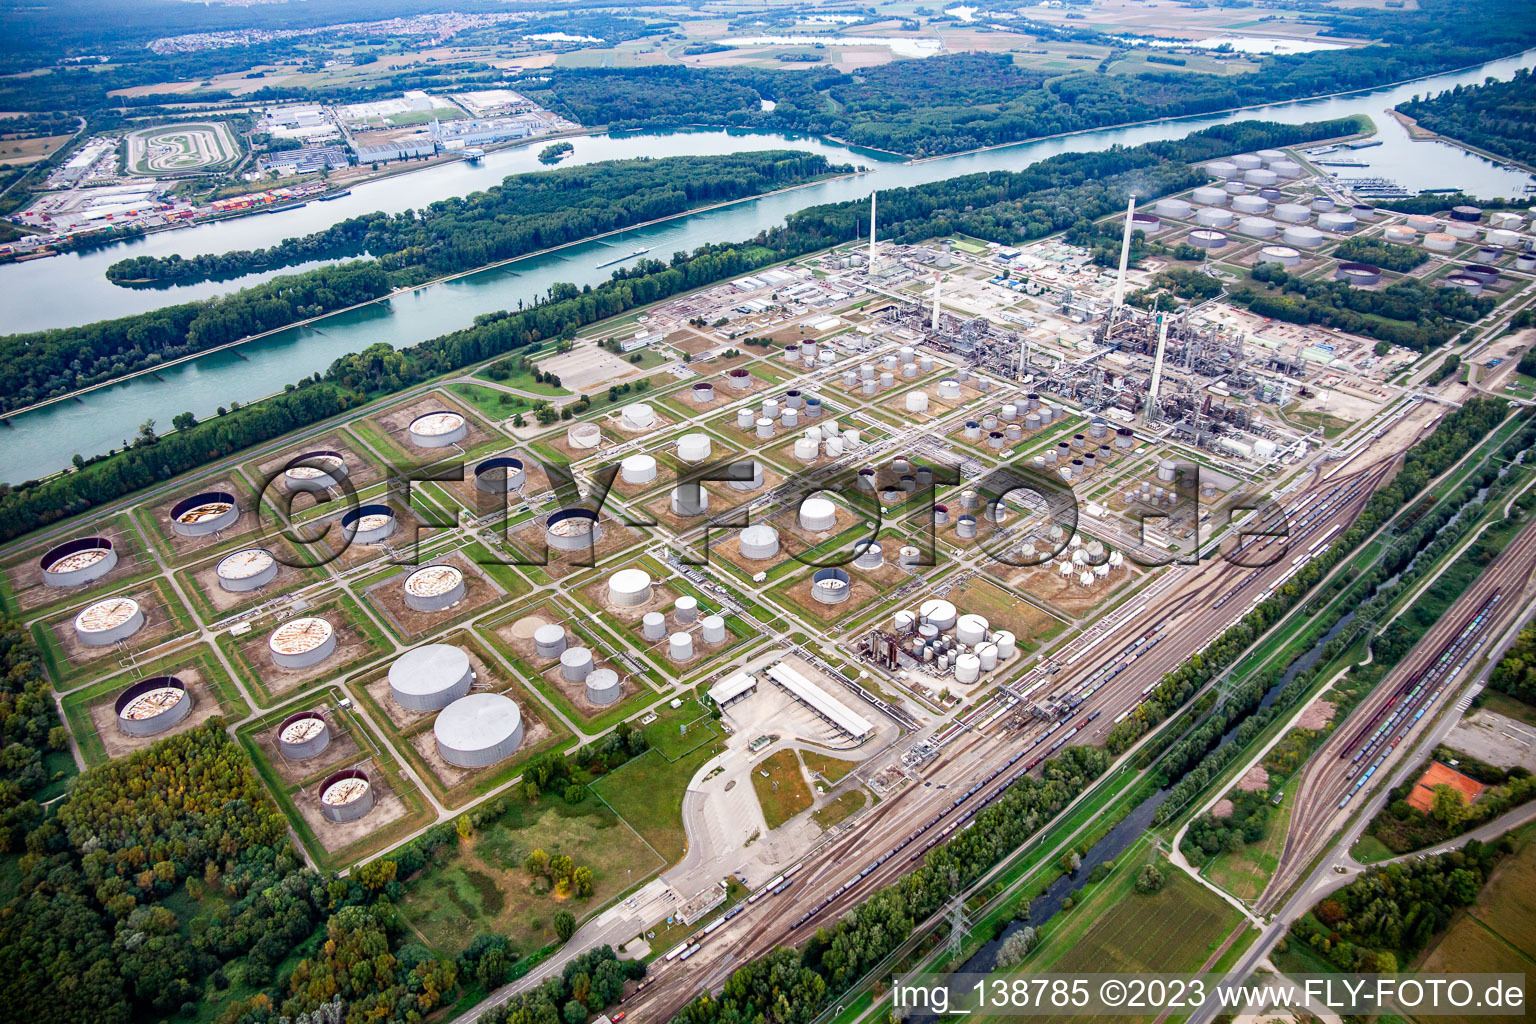 Aerial view of Upper Rhine mineral oil refinery in the district Knielingen in Karlsruhe in the state Baden-Wuerttemberg, Germany